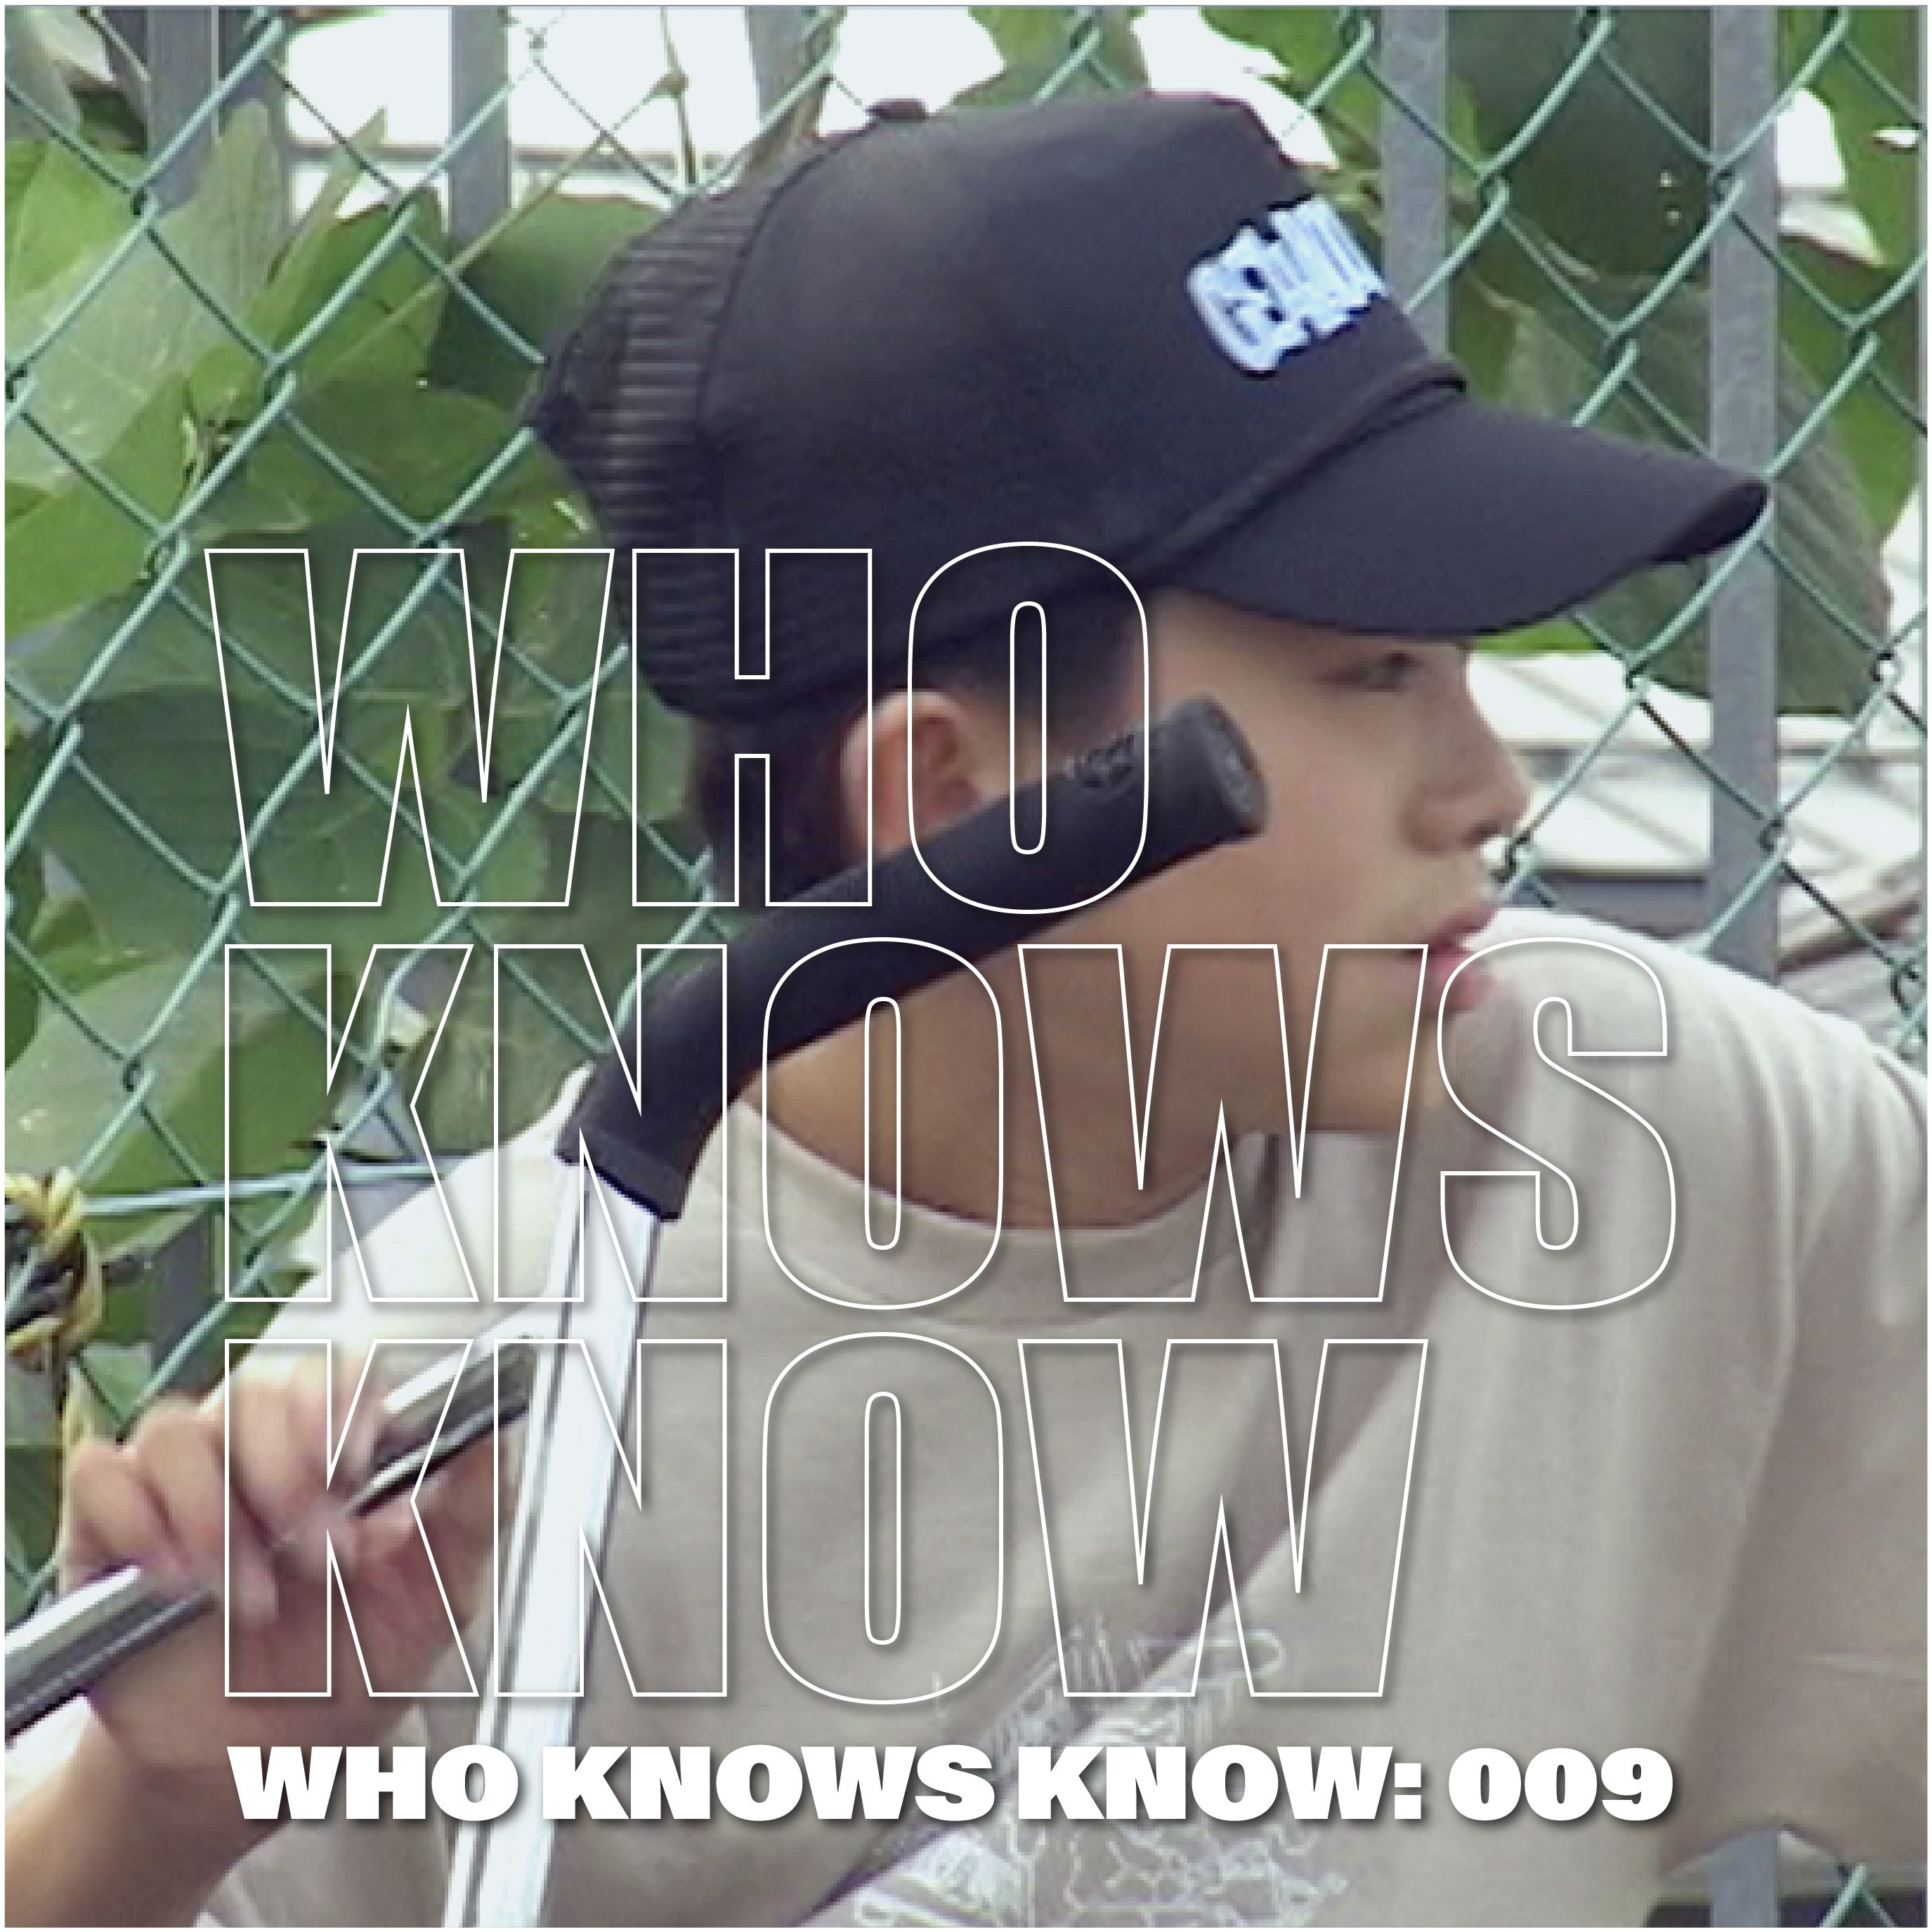 You are currently viewing WHO KNOWS KNOW: 009 YU YOSHIDA